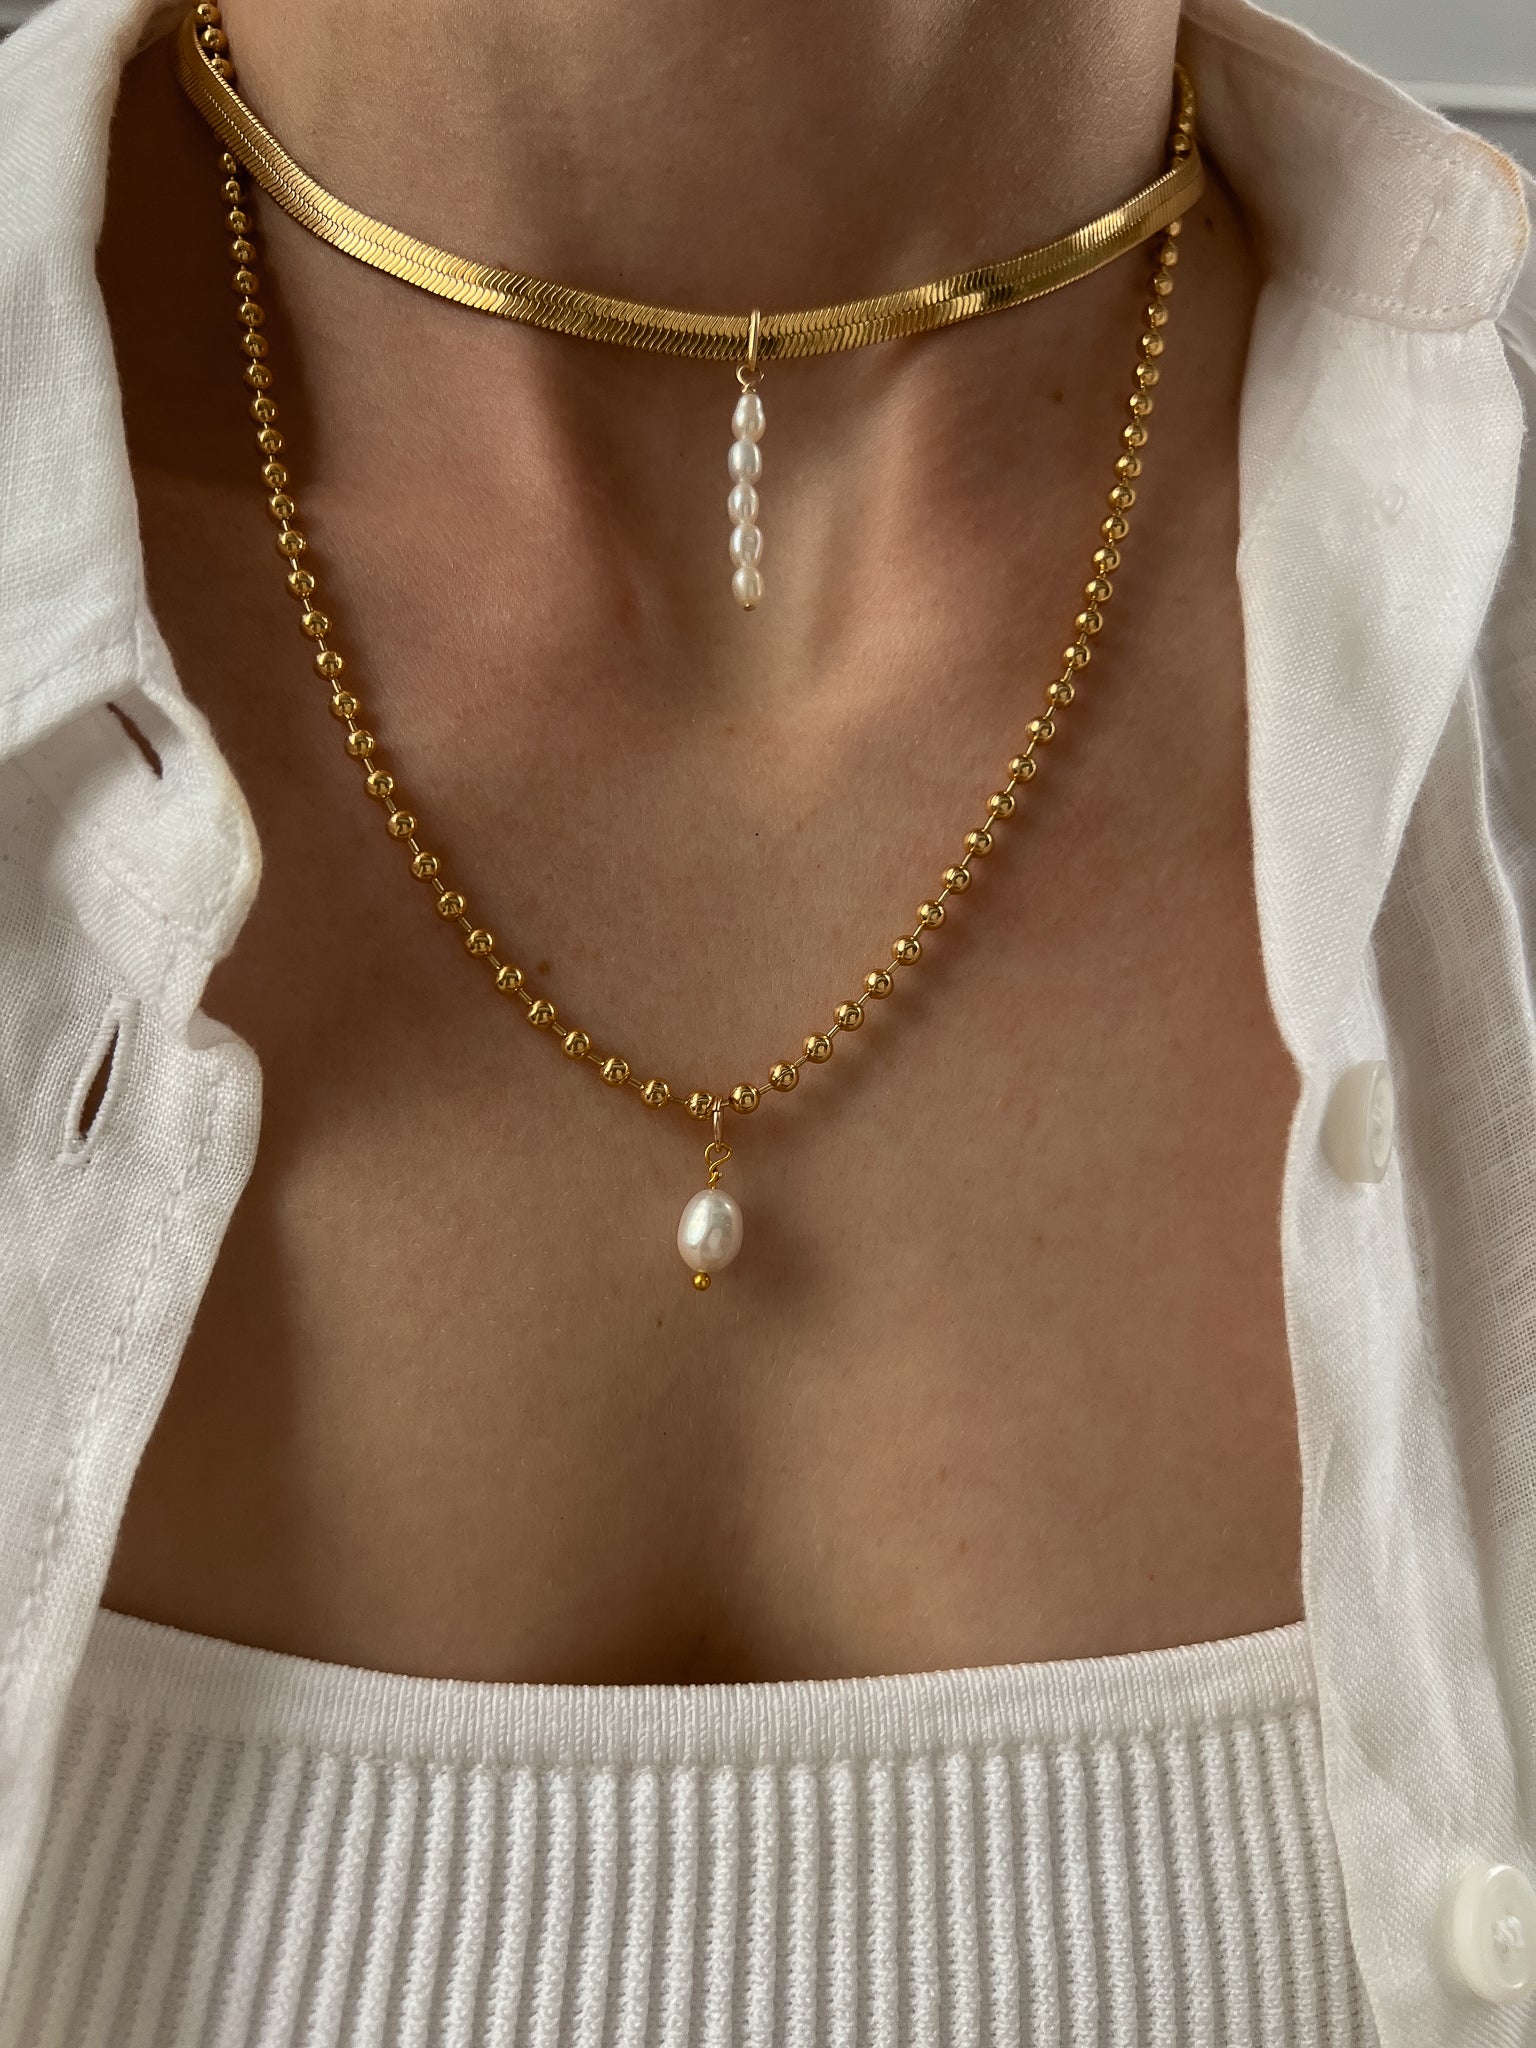 Gold Filled Pearl Keshi Freshwater Charm Ball Chain Necklace